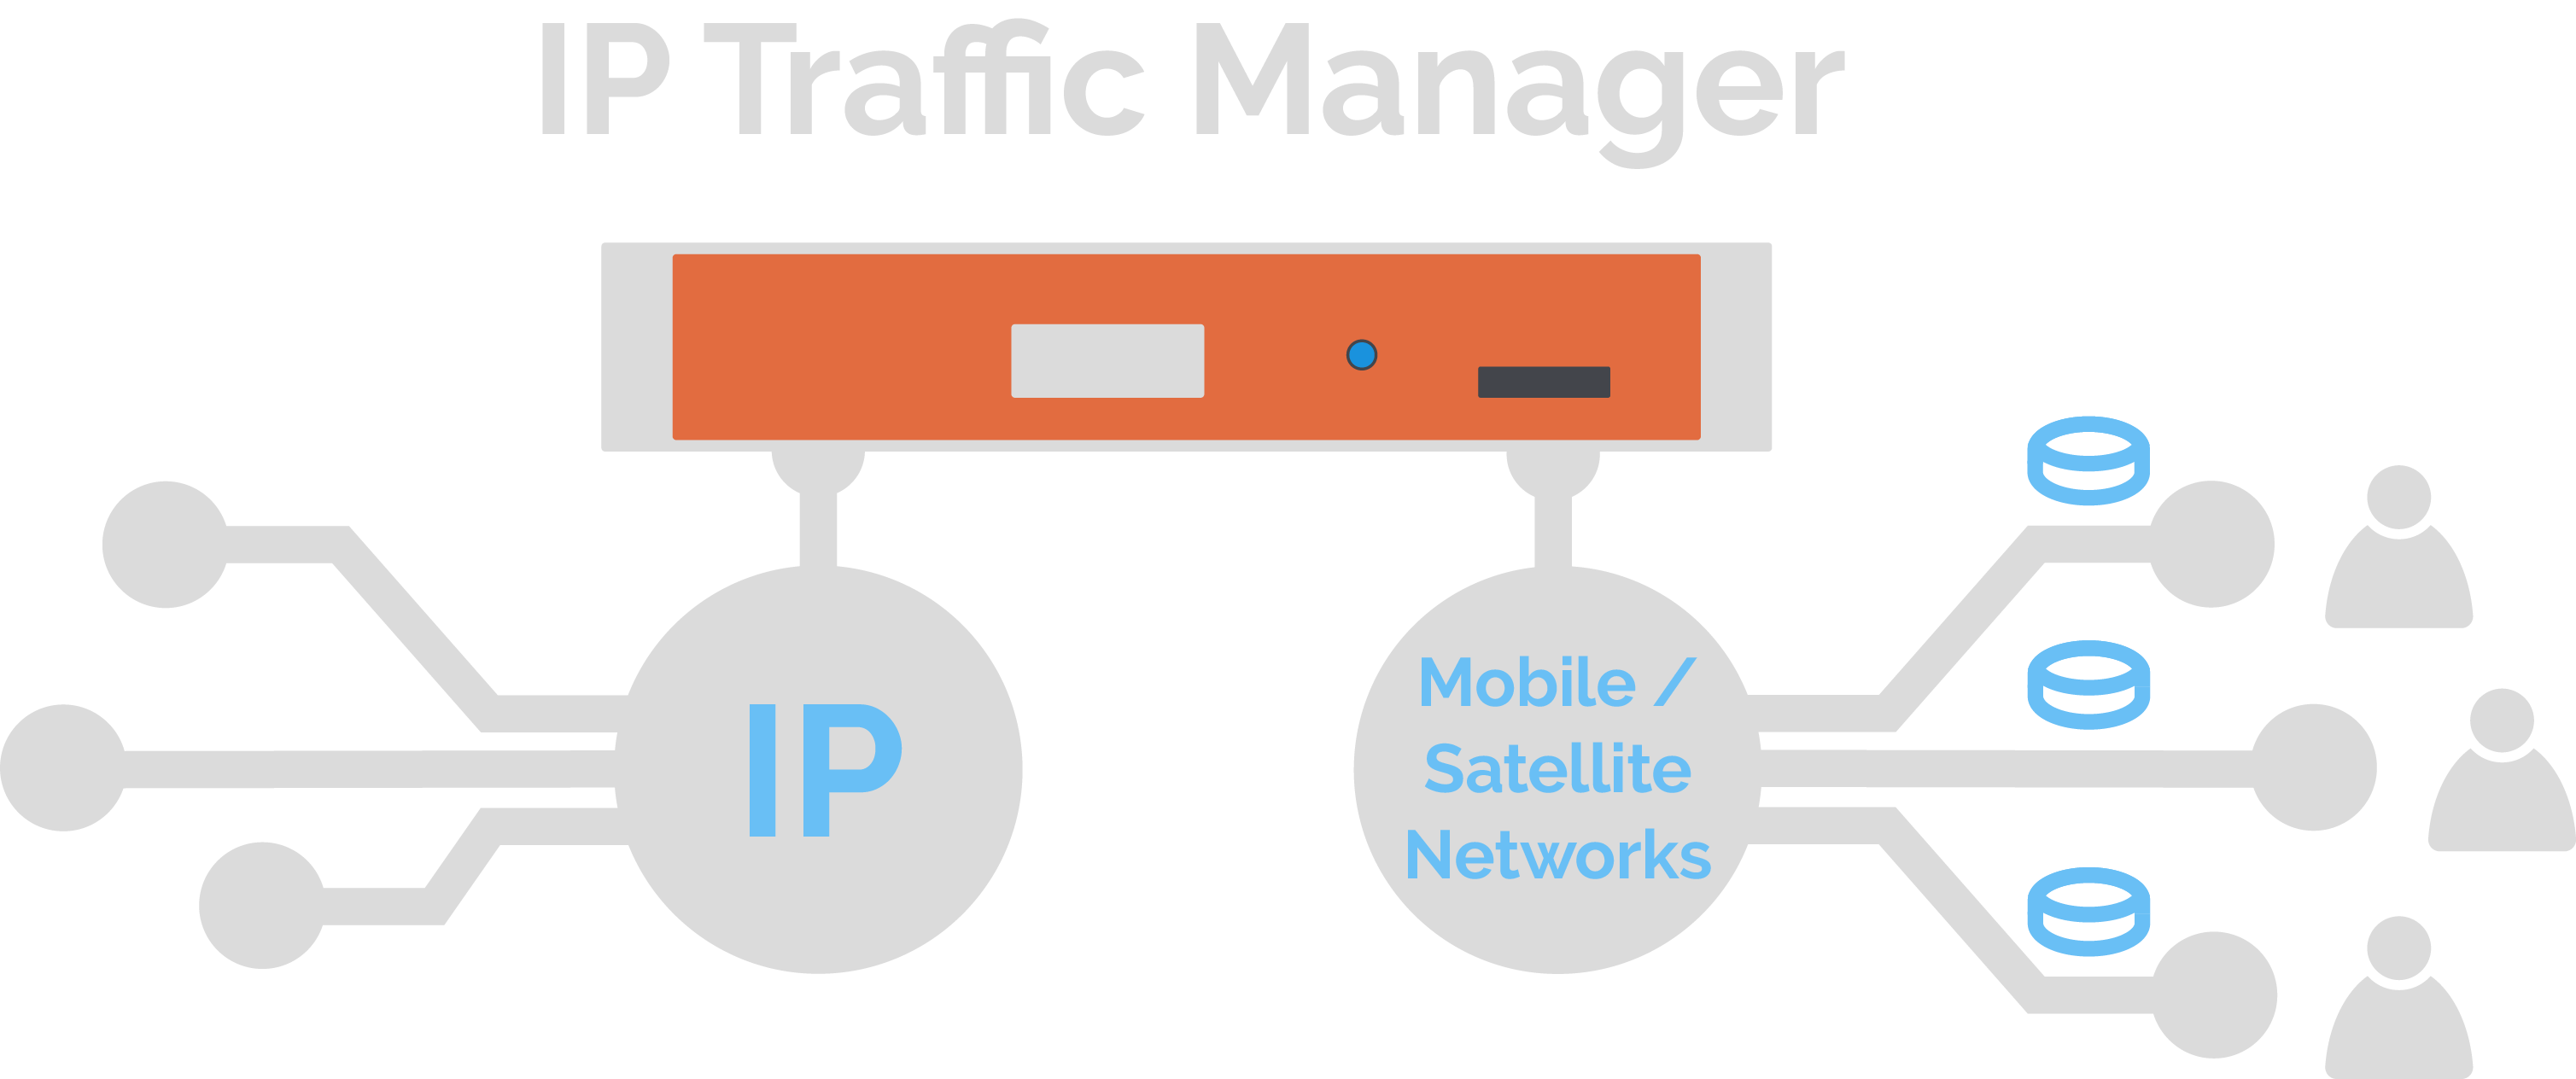 IP Traffic Manager